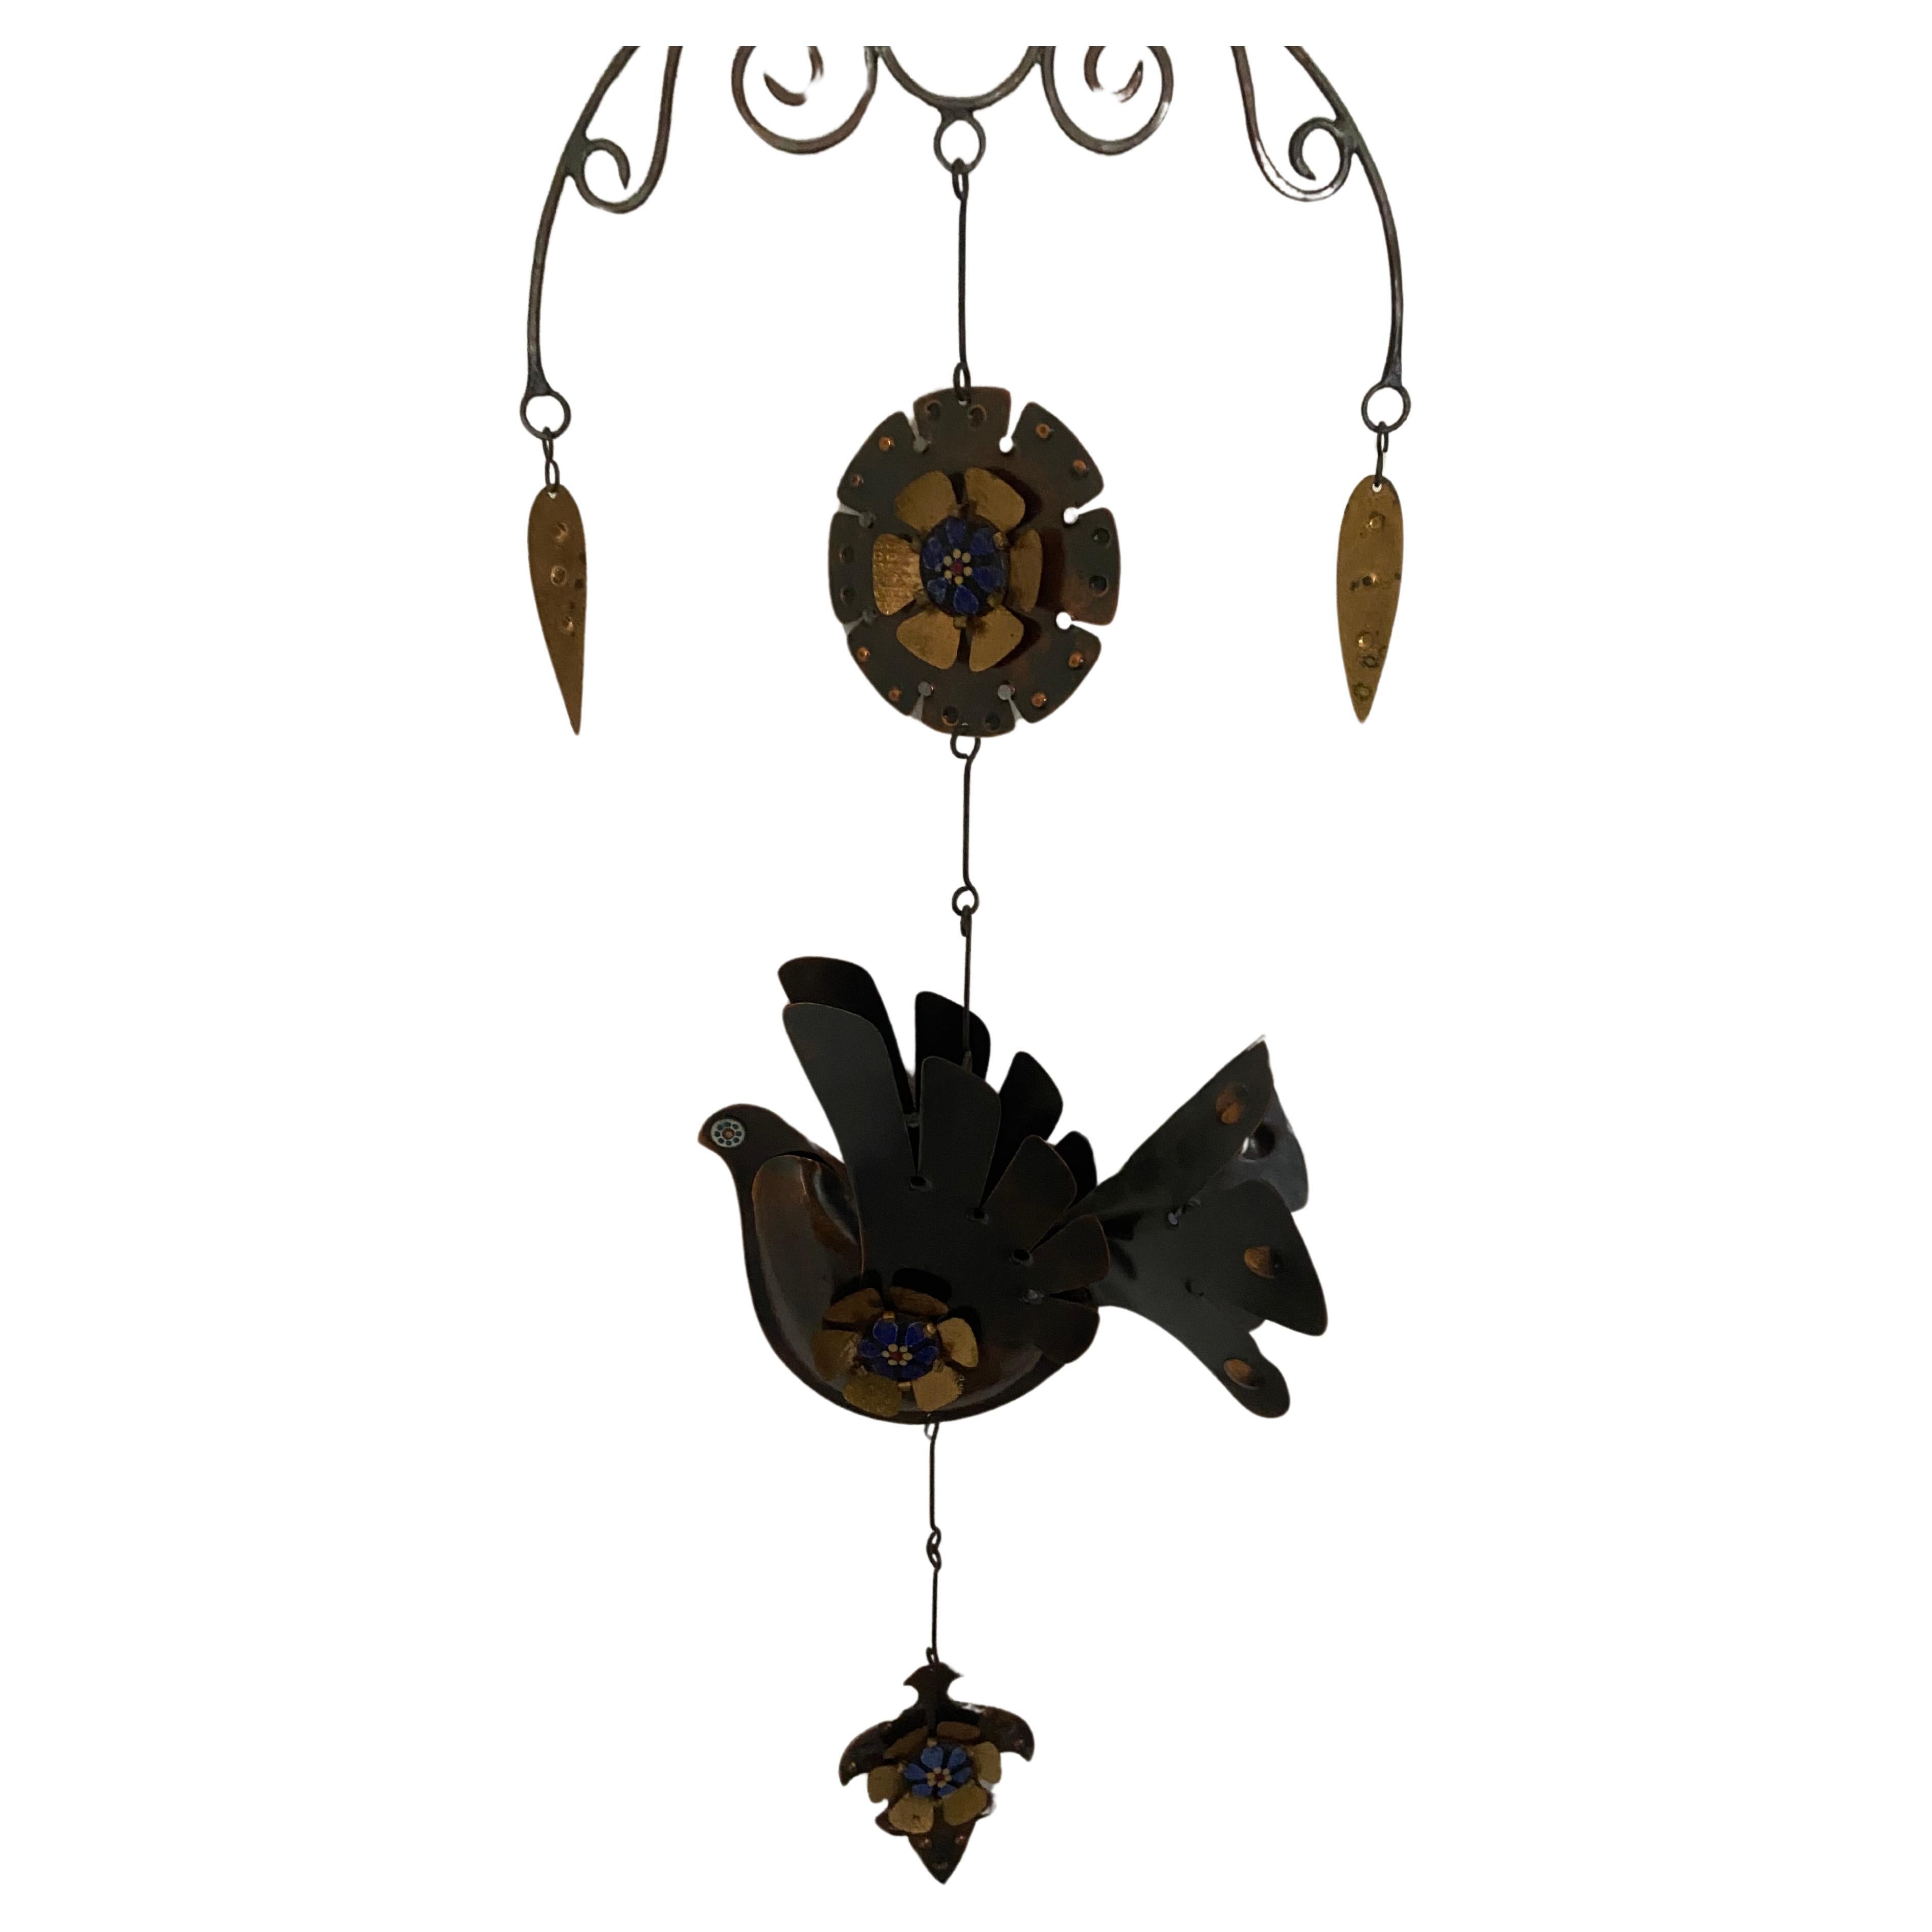 Hand crafted bronze, brass and enamel wall hanging or mobile by Chilean artist Cesar Vasquez.
